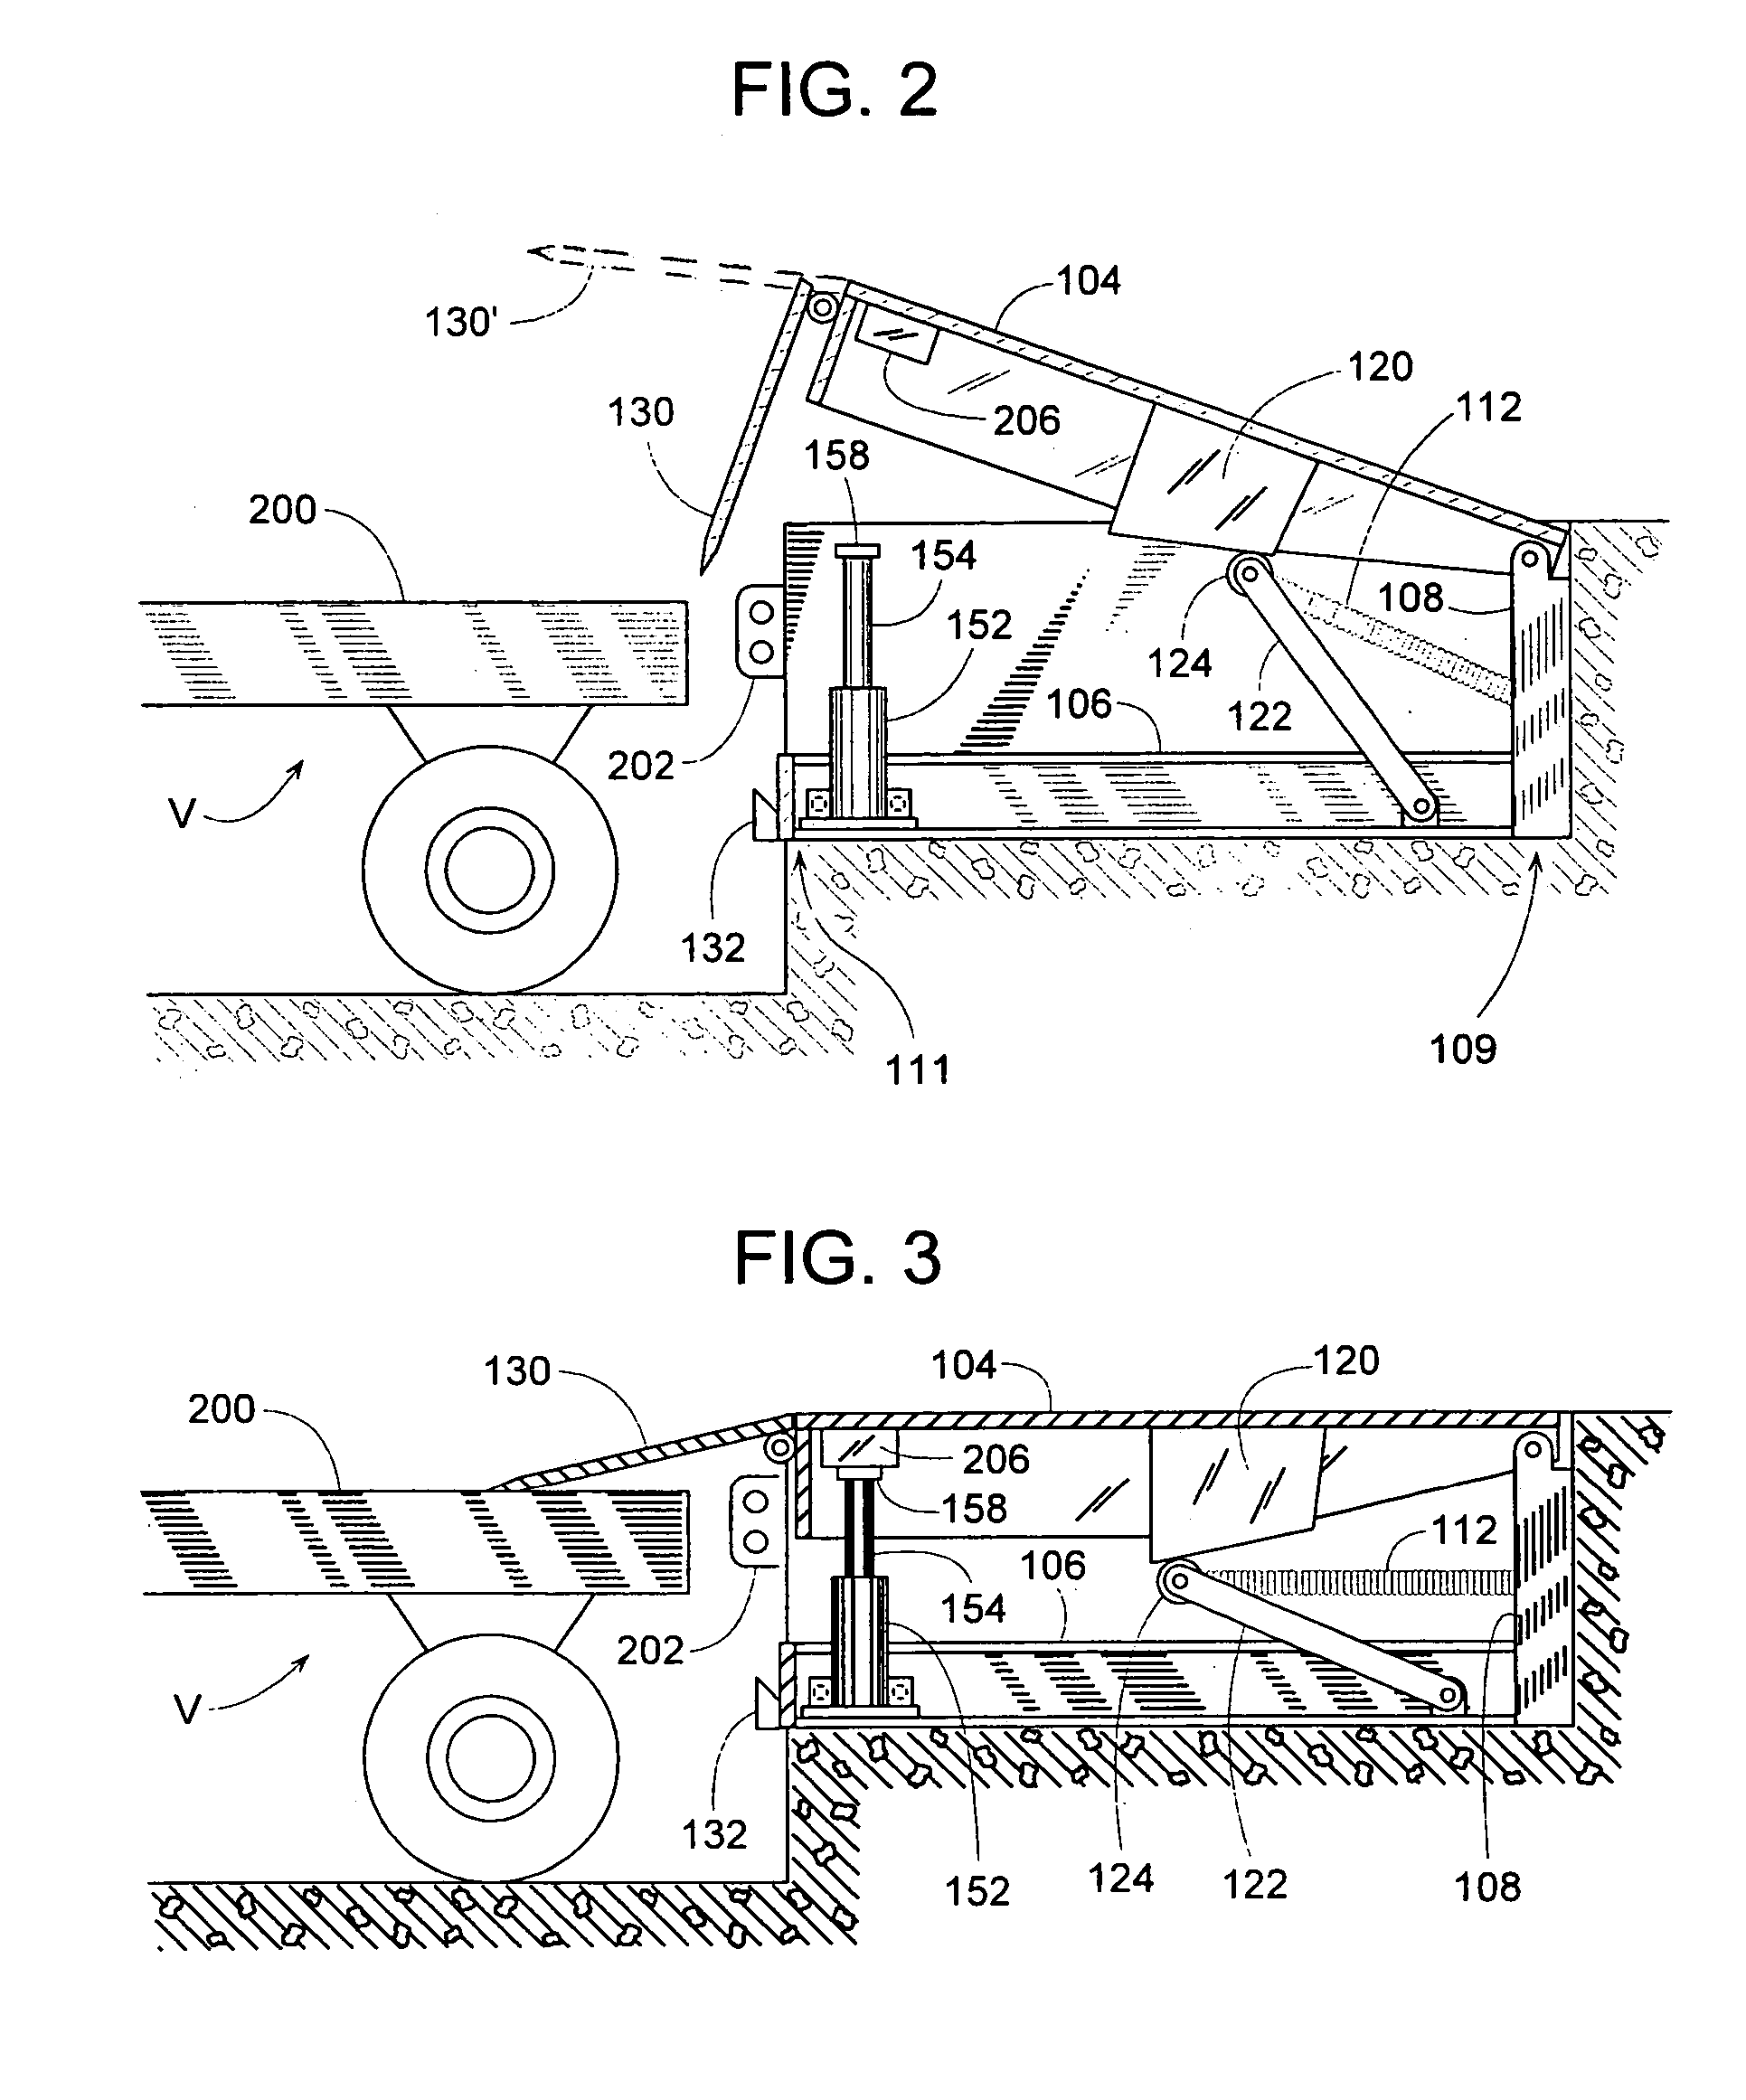 Stump-out apparatus for a dock leveler